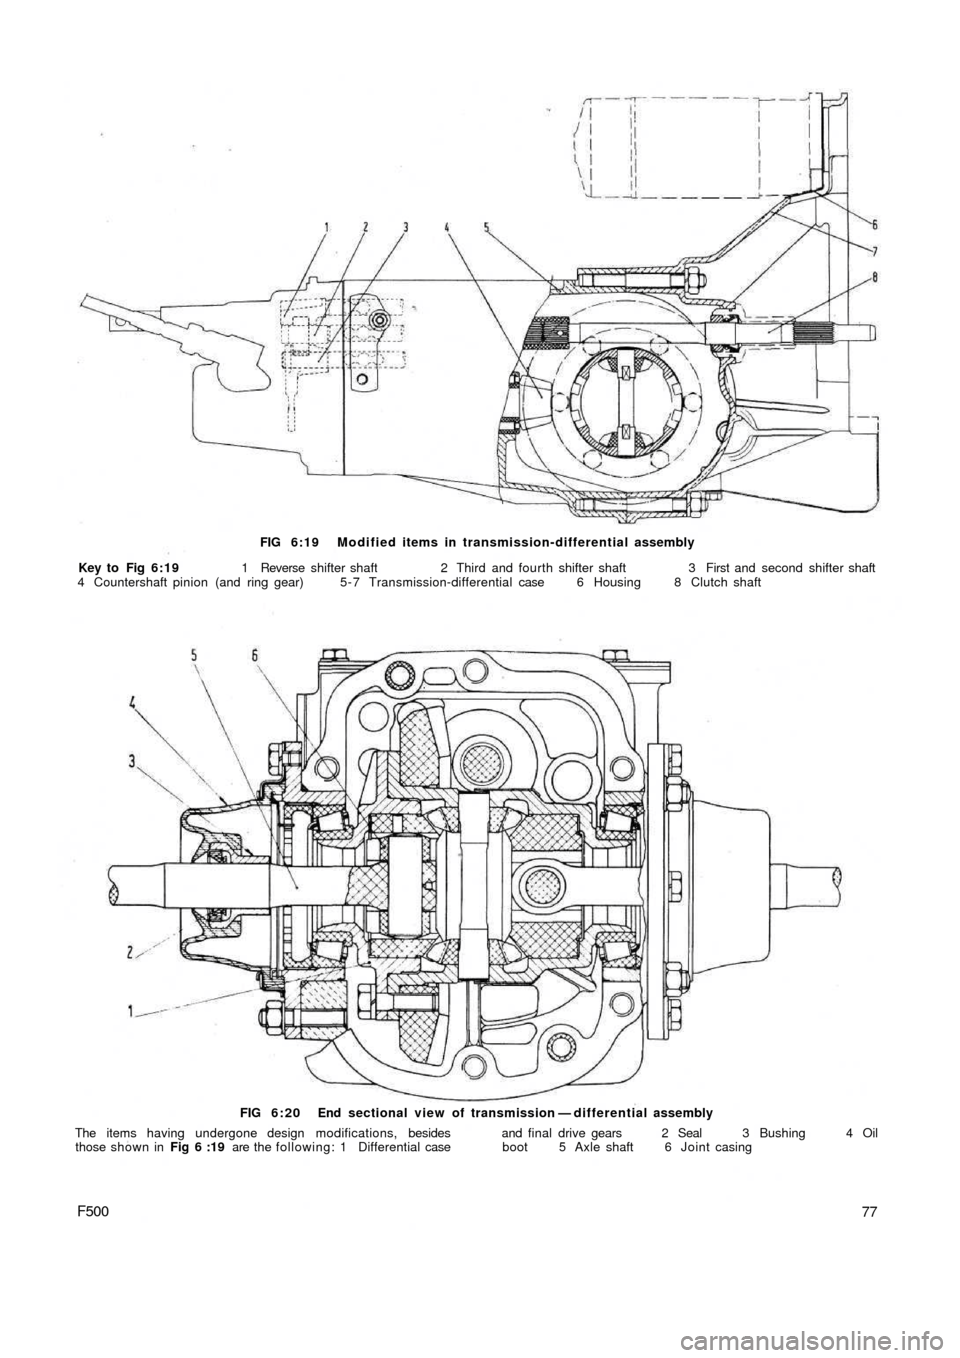 FIAT 500 1959 1.G Workshop Manual FIG 6:19 Modified items in transmission-differential assembly
Key to  Fig  6:19 1 Reverse shifter shaft  2 Third and fourth shifter shaft  3 First and second shifter shaft
4 Countershaft pinion (and r